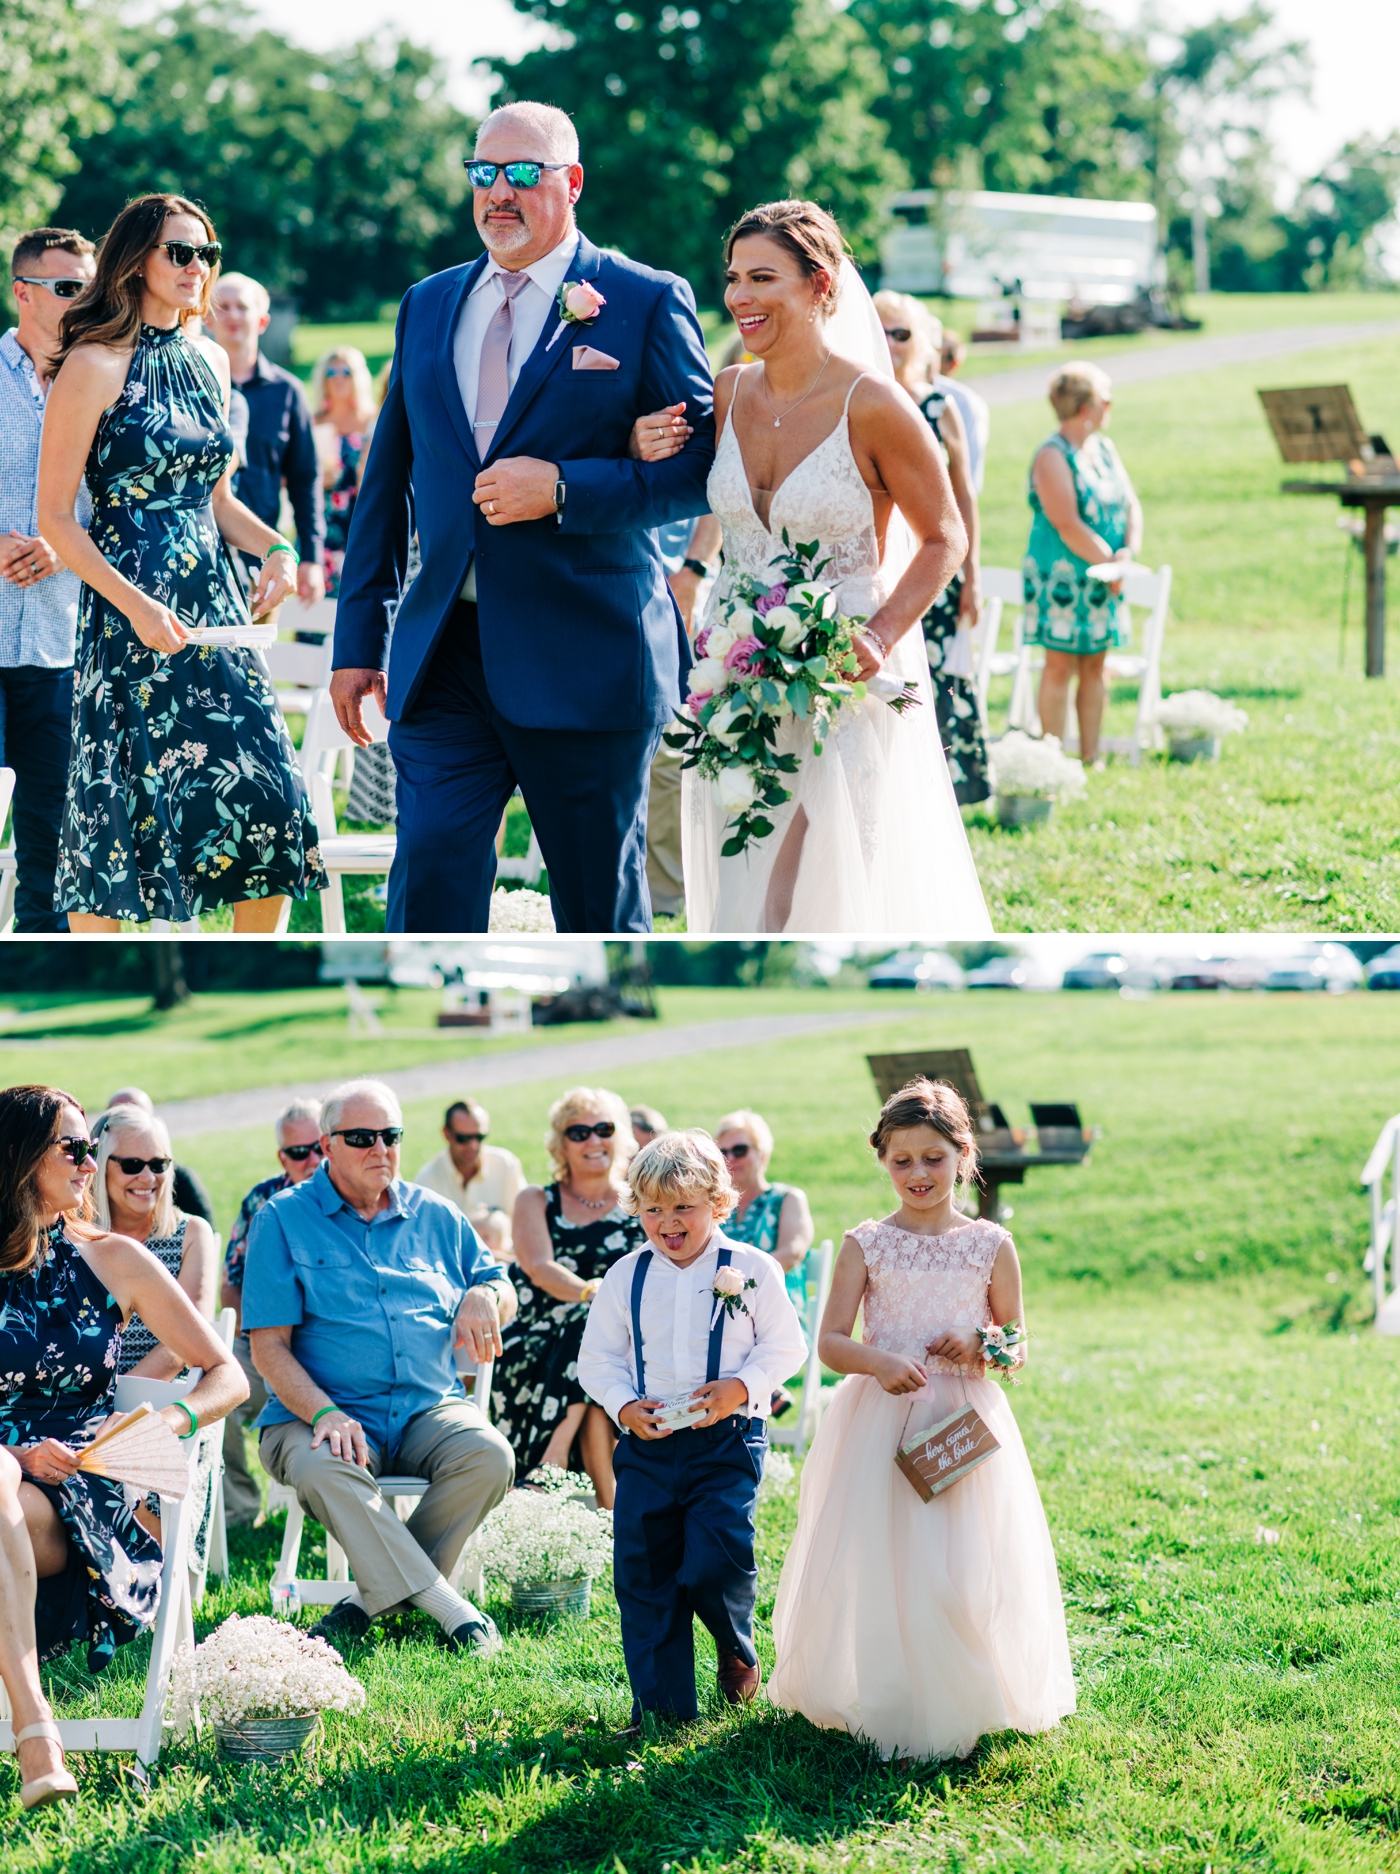 Outdoor wedding ceremony on the lawn at The White Silo Barn